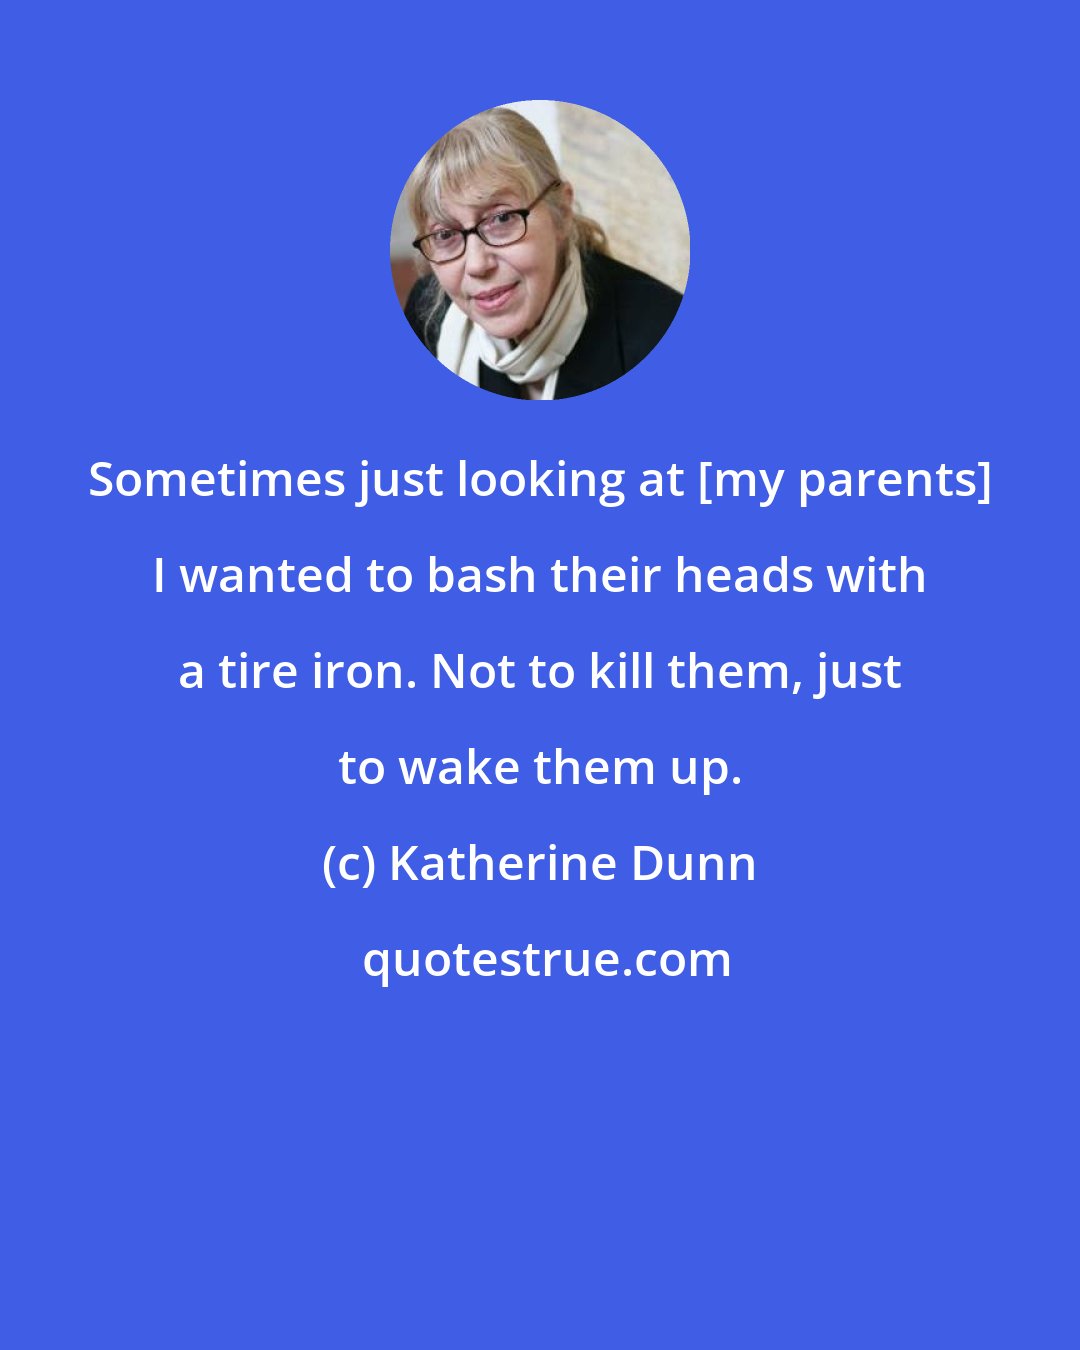 Katherine Dunn: Sometimes just looking at [my parents] I wanted to bash their heads with a tire iron. Not to kill them, just to wake them up.